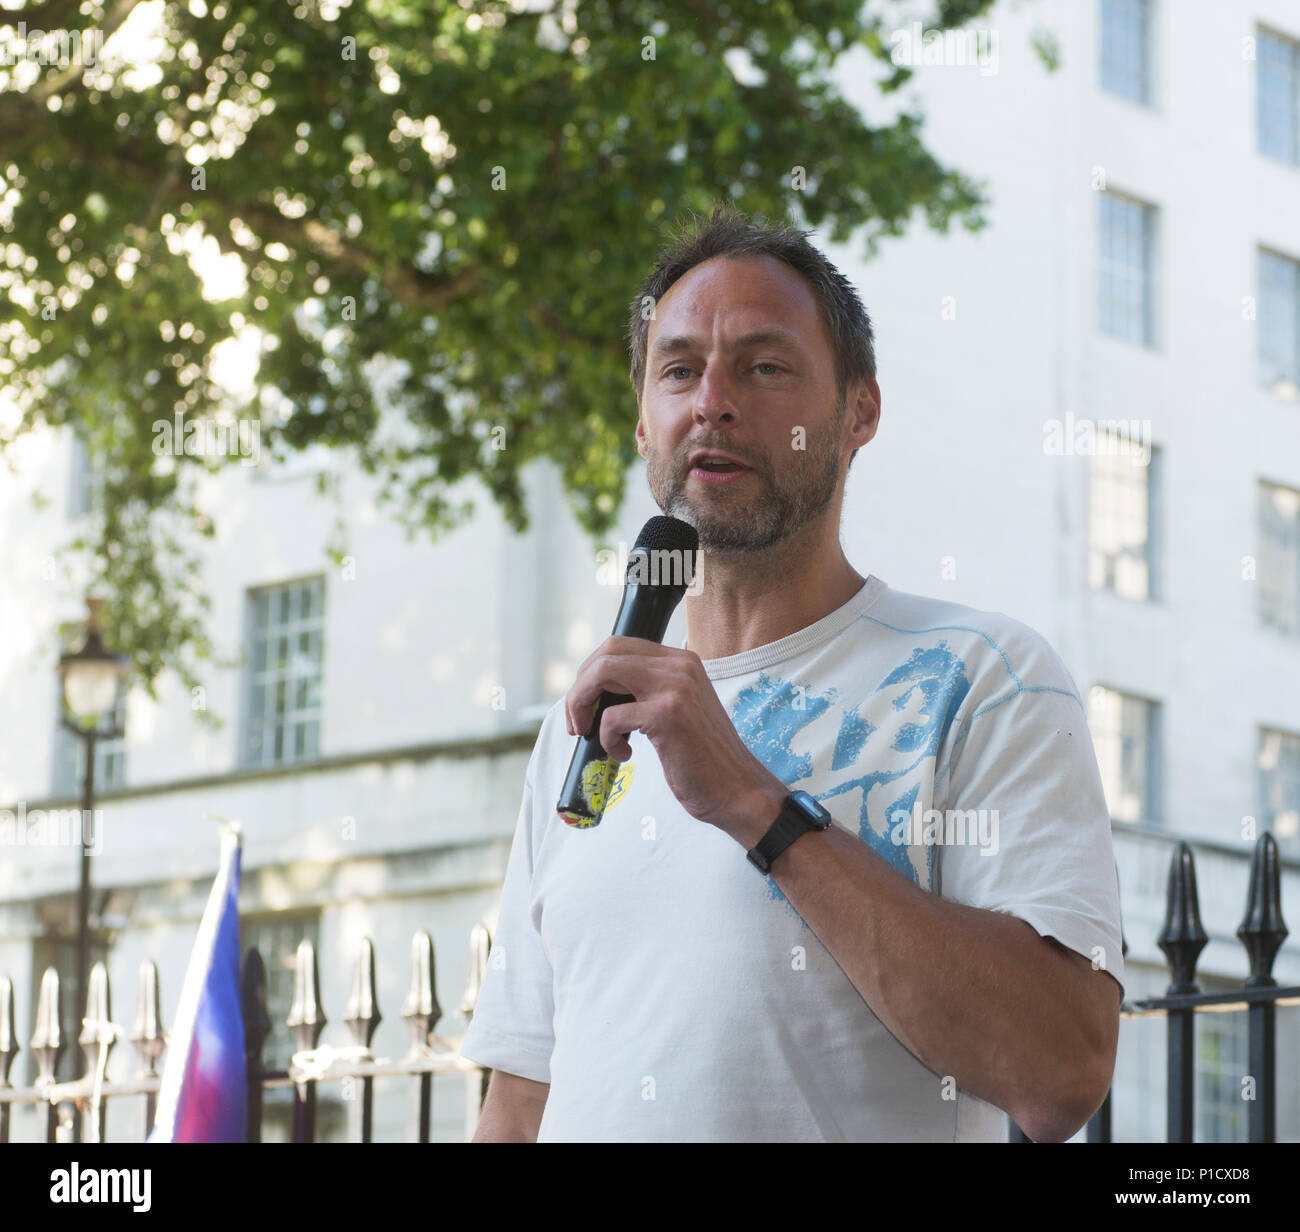 London, UK. 11 June 2018 - London - Leo Kearse - Scottish Comedian of the Year 2017 - perfoming at the anti brexit protest organised by Stop Brexit Ltd, No 10 Vigil, EU Flag Mafia and SODEM. The protest is to support the Article 50 challenge which comes to court on 12 June 2018 which proposes that the invoking of Article 50 to leave the EU was illegal because the decision to leave the EU was never passed by parliament. This part of the protest is opposite Downing Street, London by Richmond Terrace. Further information from rachel@stopbrexitmarch.com  #No10Vigil #remainathon. Credit: Bruce Tann Stock Photo